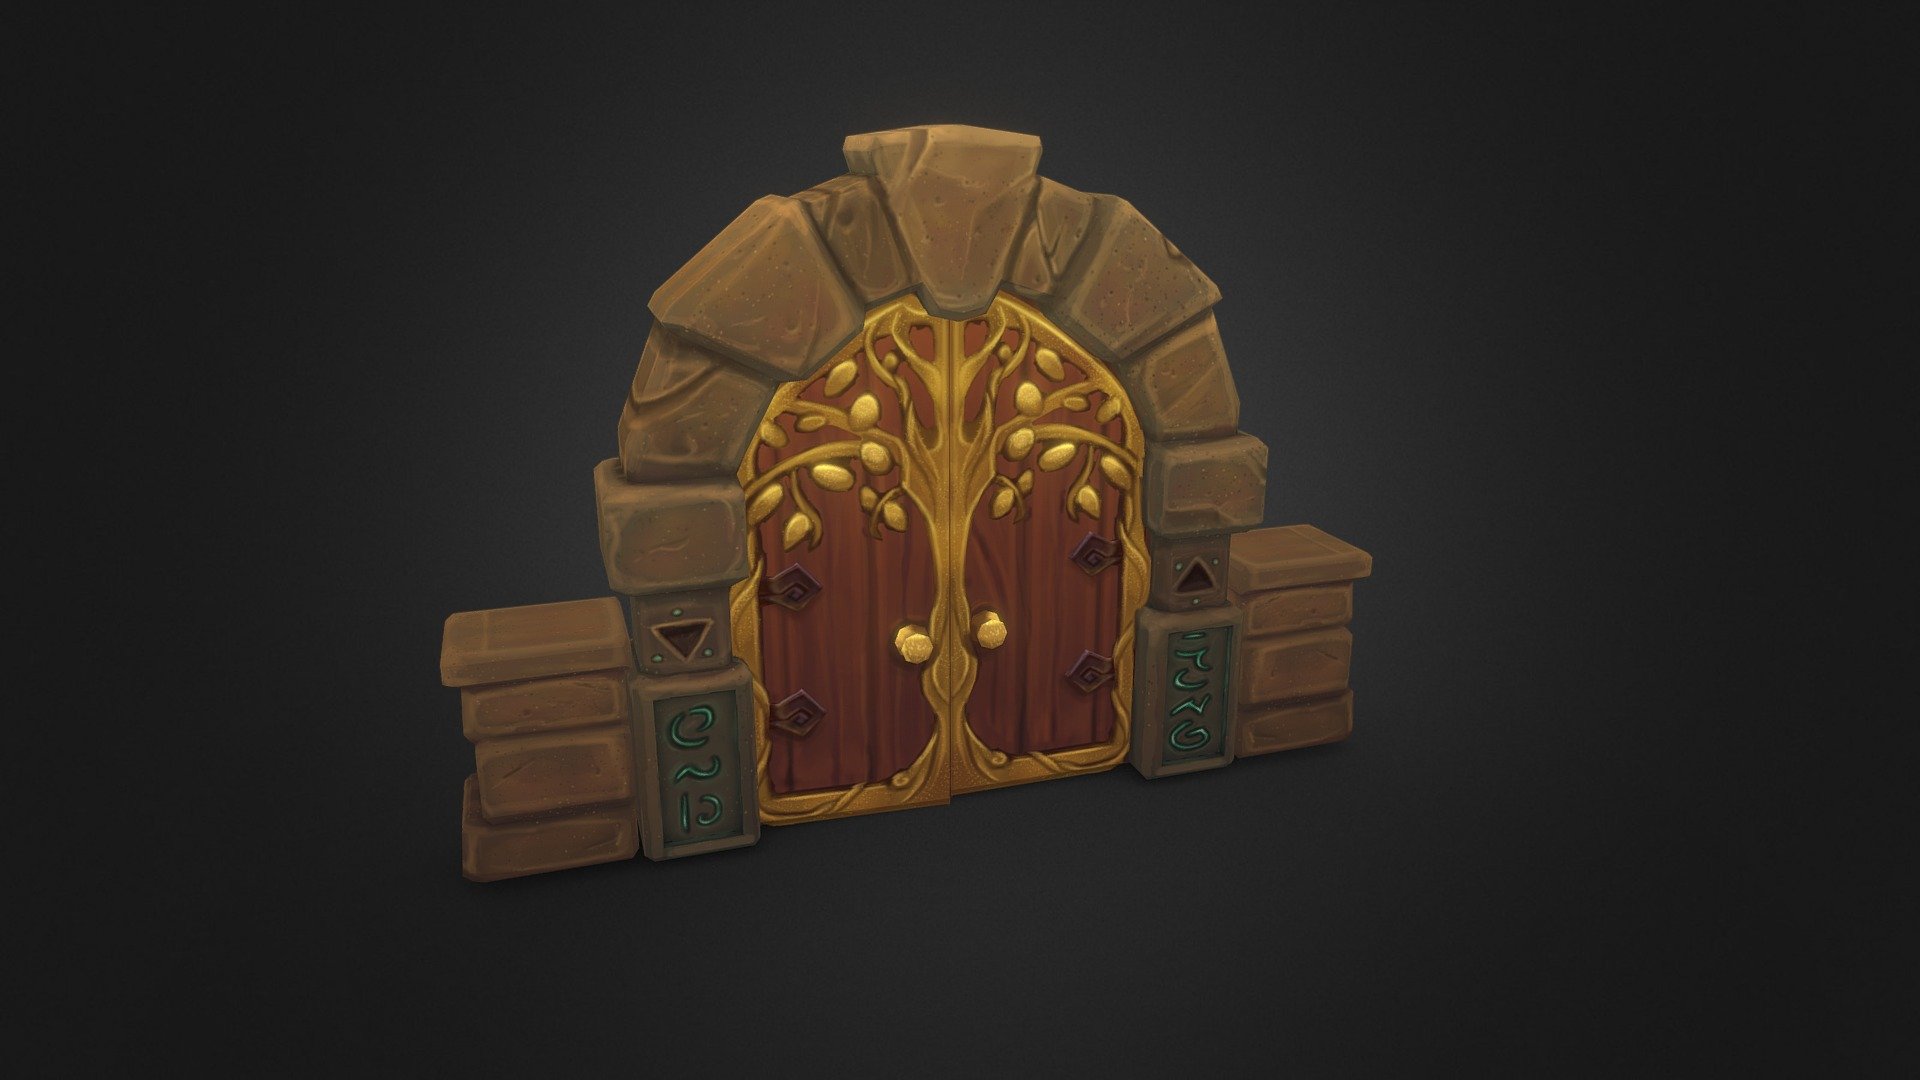 This piece was prepared for my last week at CGMA - Stylized Game Assets course, by Ashleigh Warner.

This long forgotten gate leads to the Queen's Gardens, where generations of royal ladies are said to have hidden their most precious secrets. Now free for the taken, if you can only find the key to unlocking this door :) - Garden Gate - Buy Royalty Free 3D model by Hadas Drory Noam (@zinnfandel) 3d model